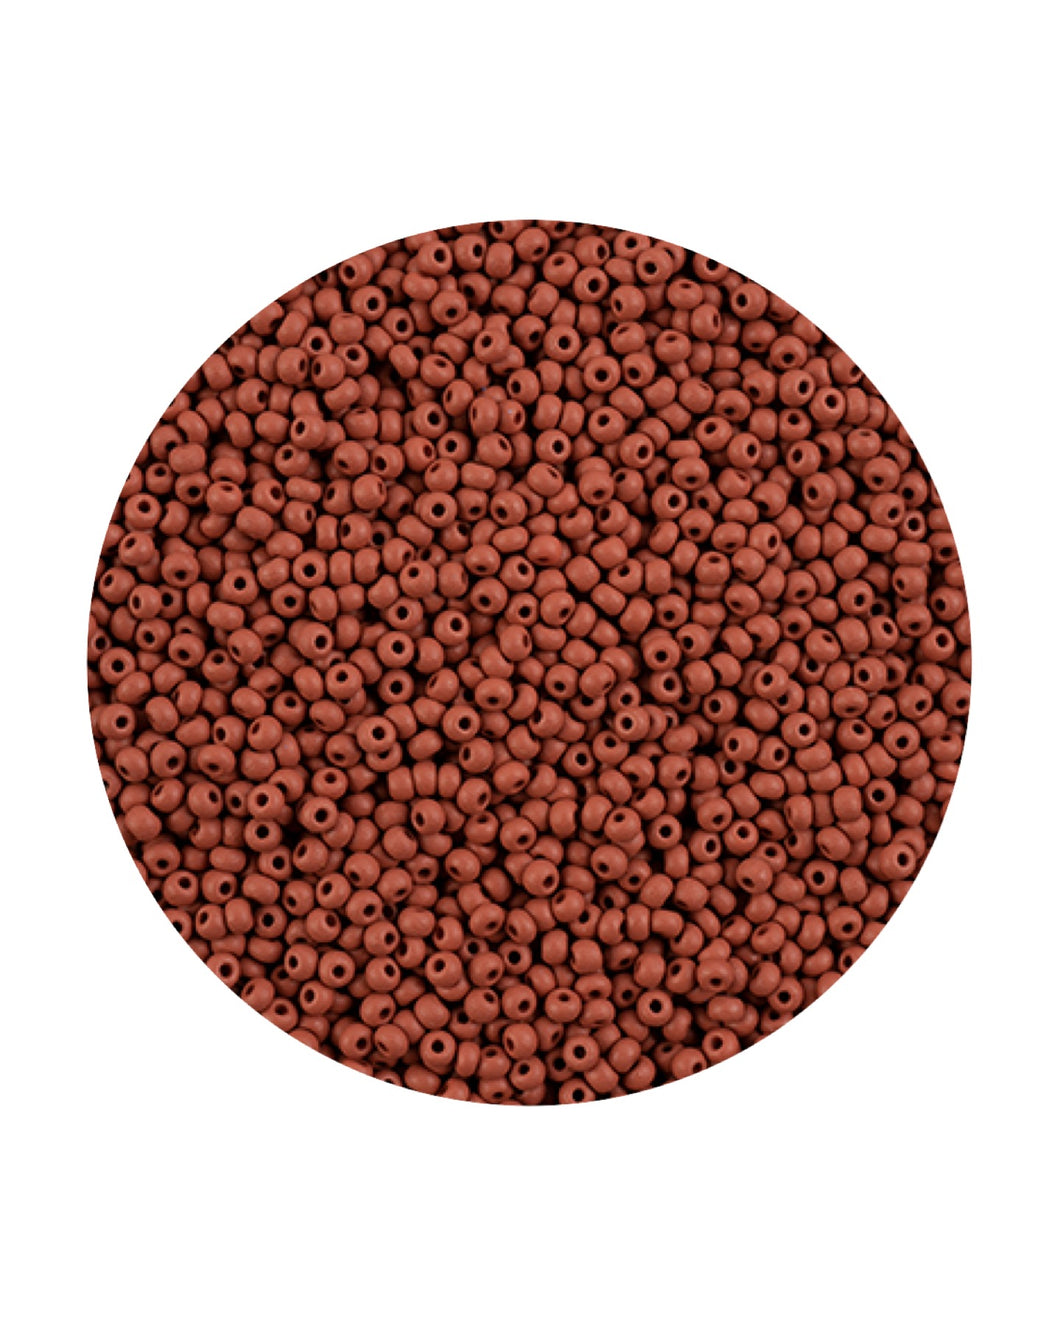 11/0 Preciosa Permalux Seed Beads Dyed Chalk Brown Matte, 23g Bags